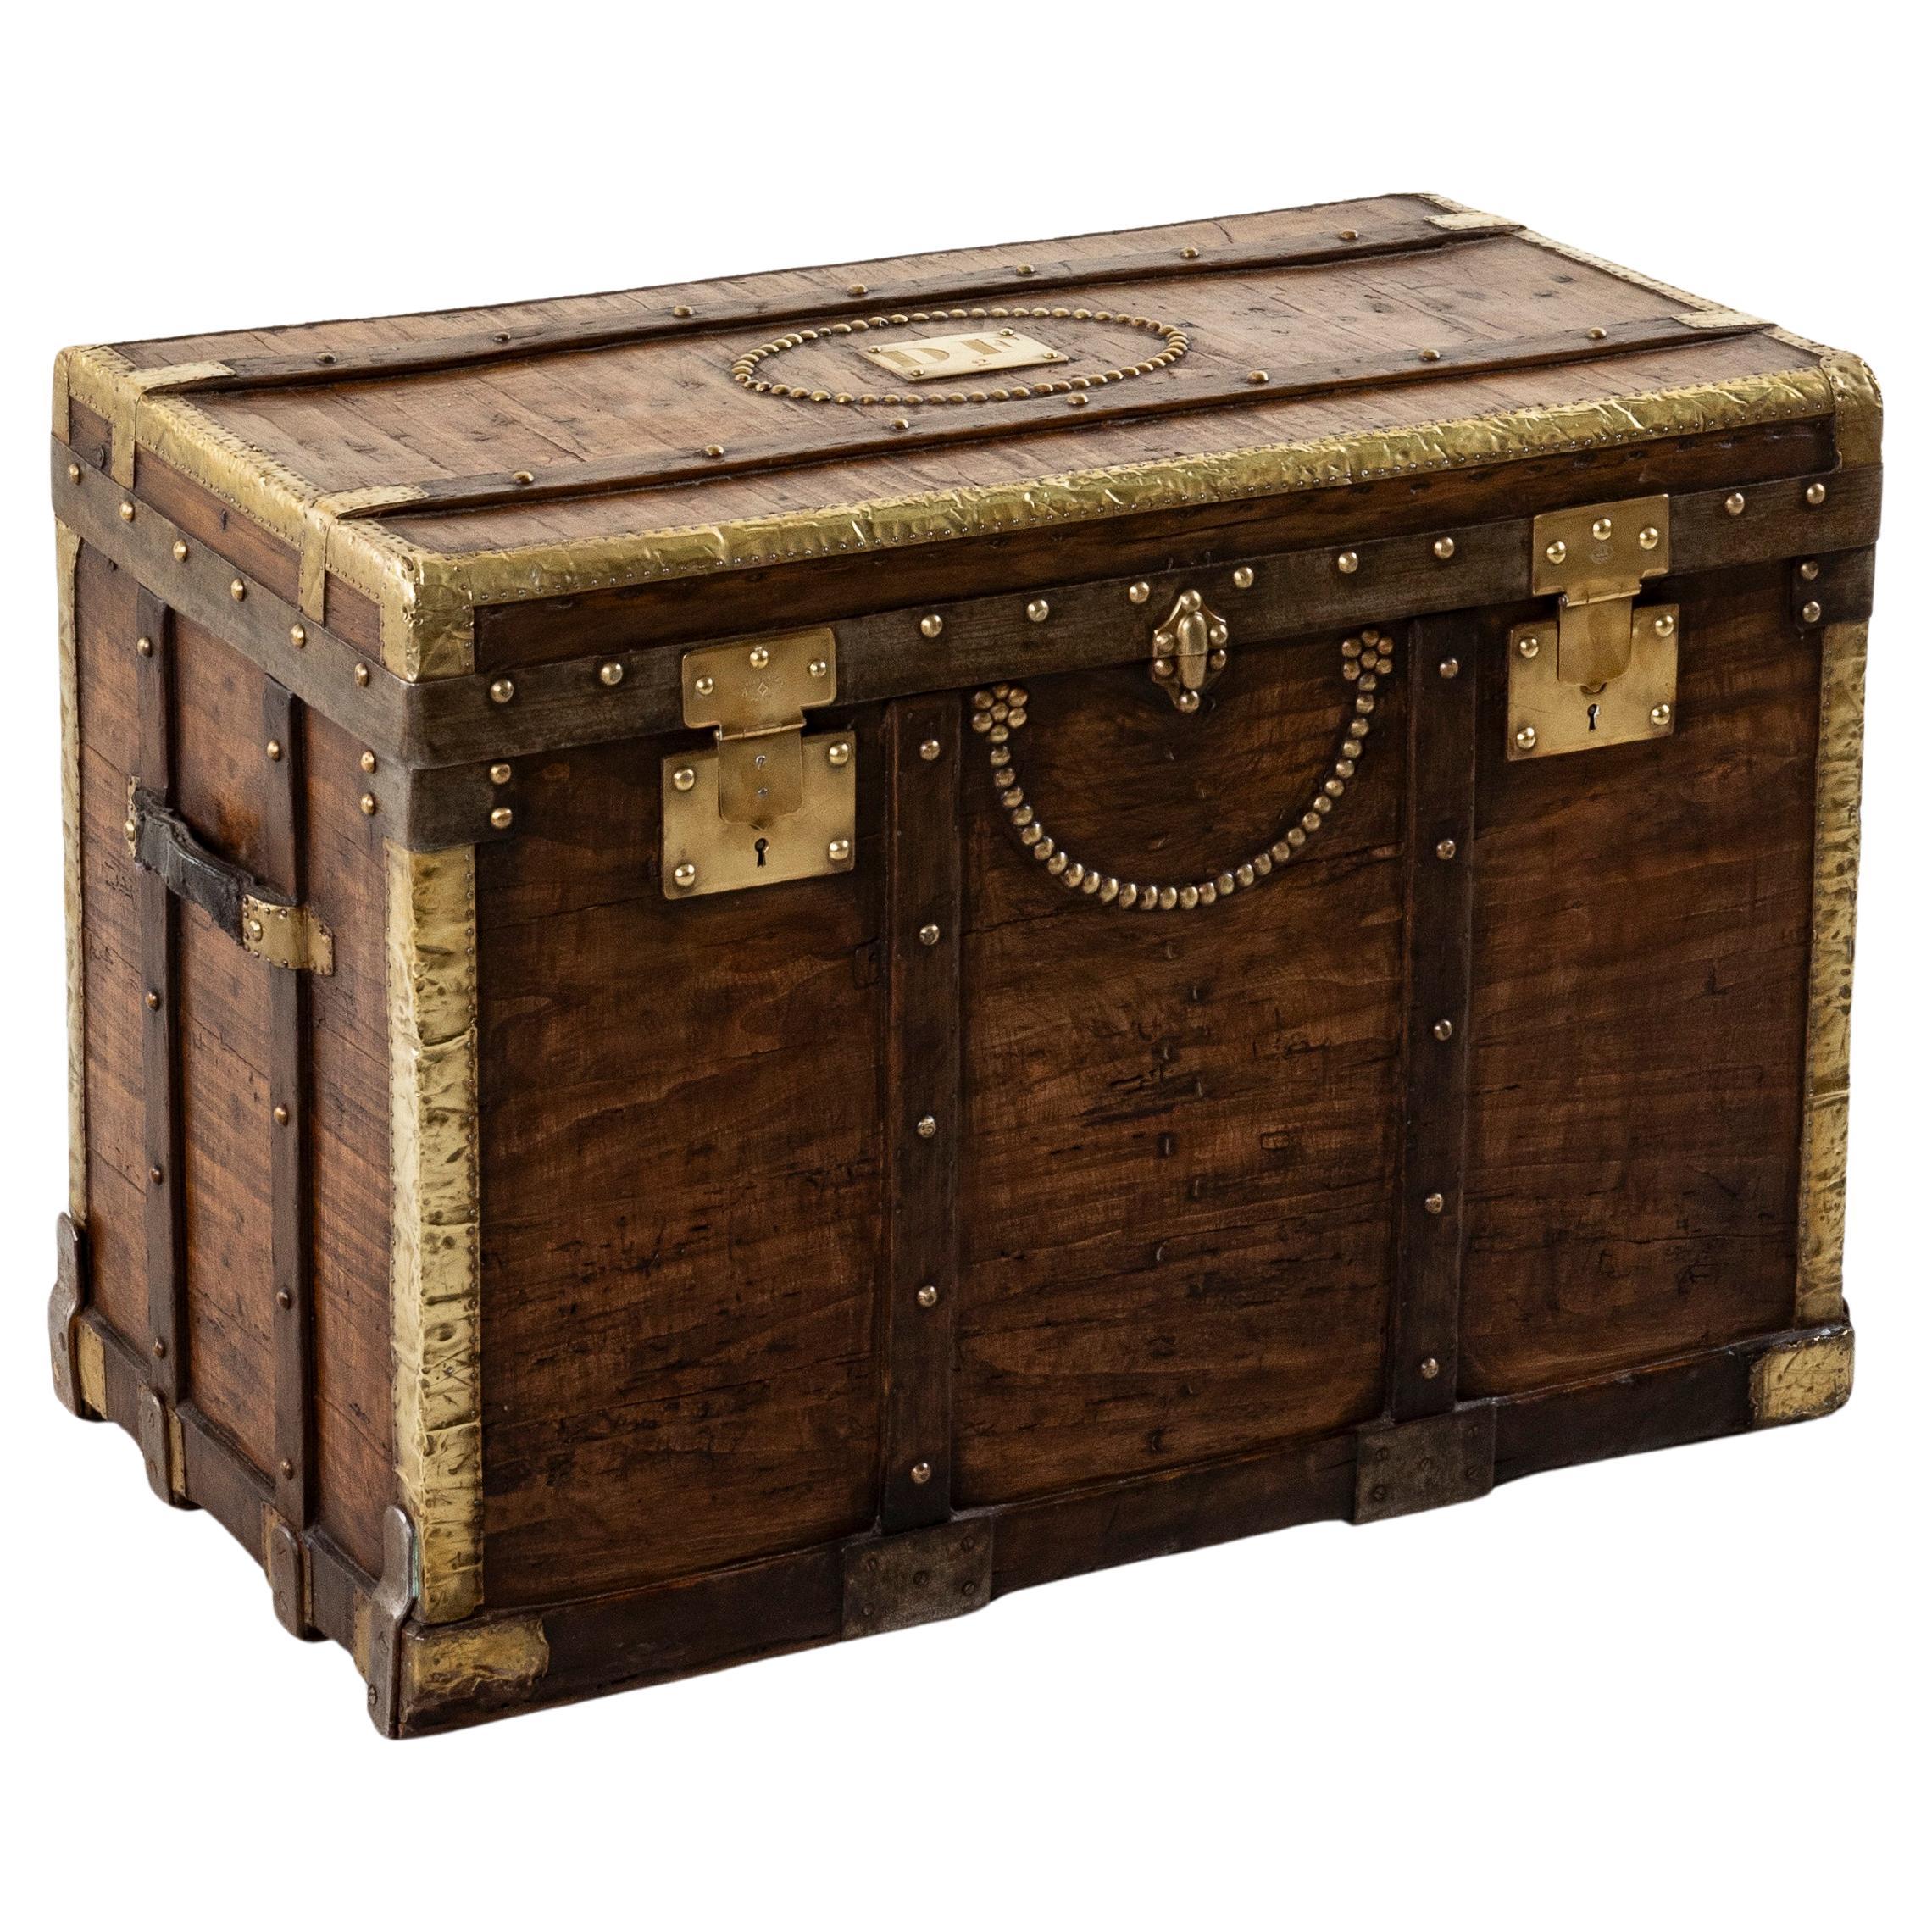 French Wooden Steam Trunk with Runners, Brass, Iron, Leather Details, circa 1880 For Sale